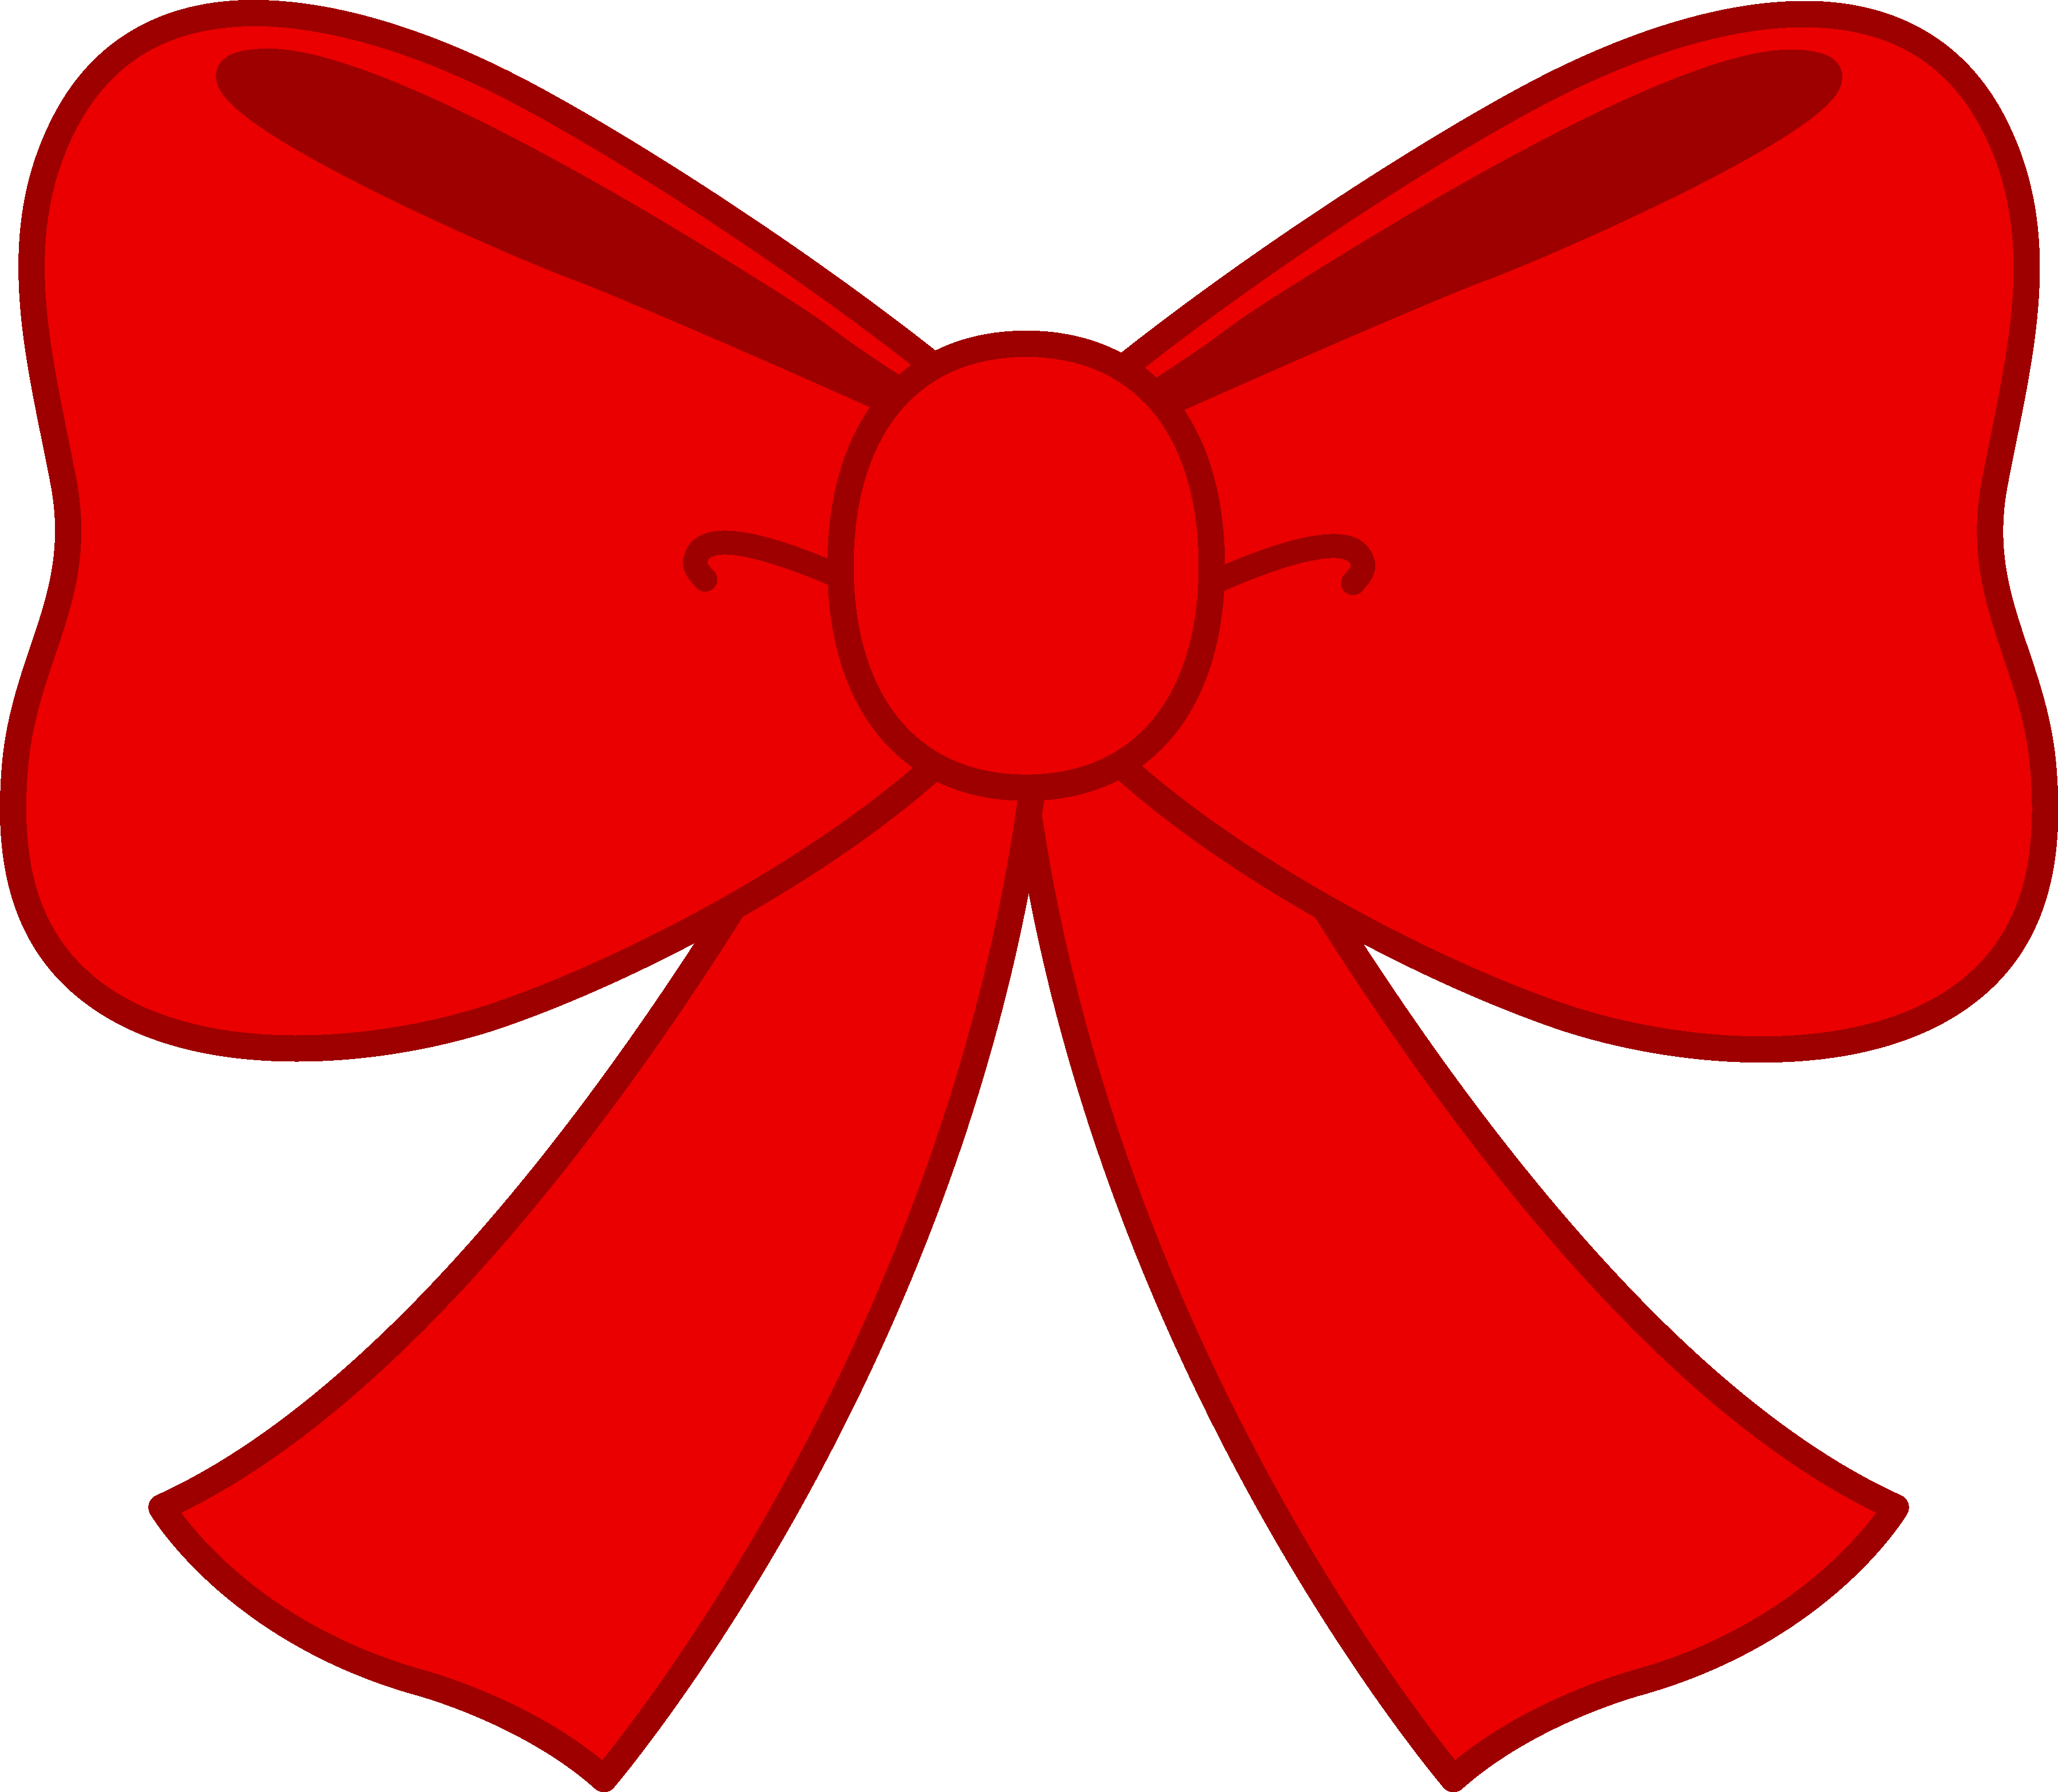 Happy holidays image of bows clipart 0 christmas bows clip art happy